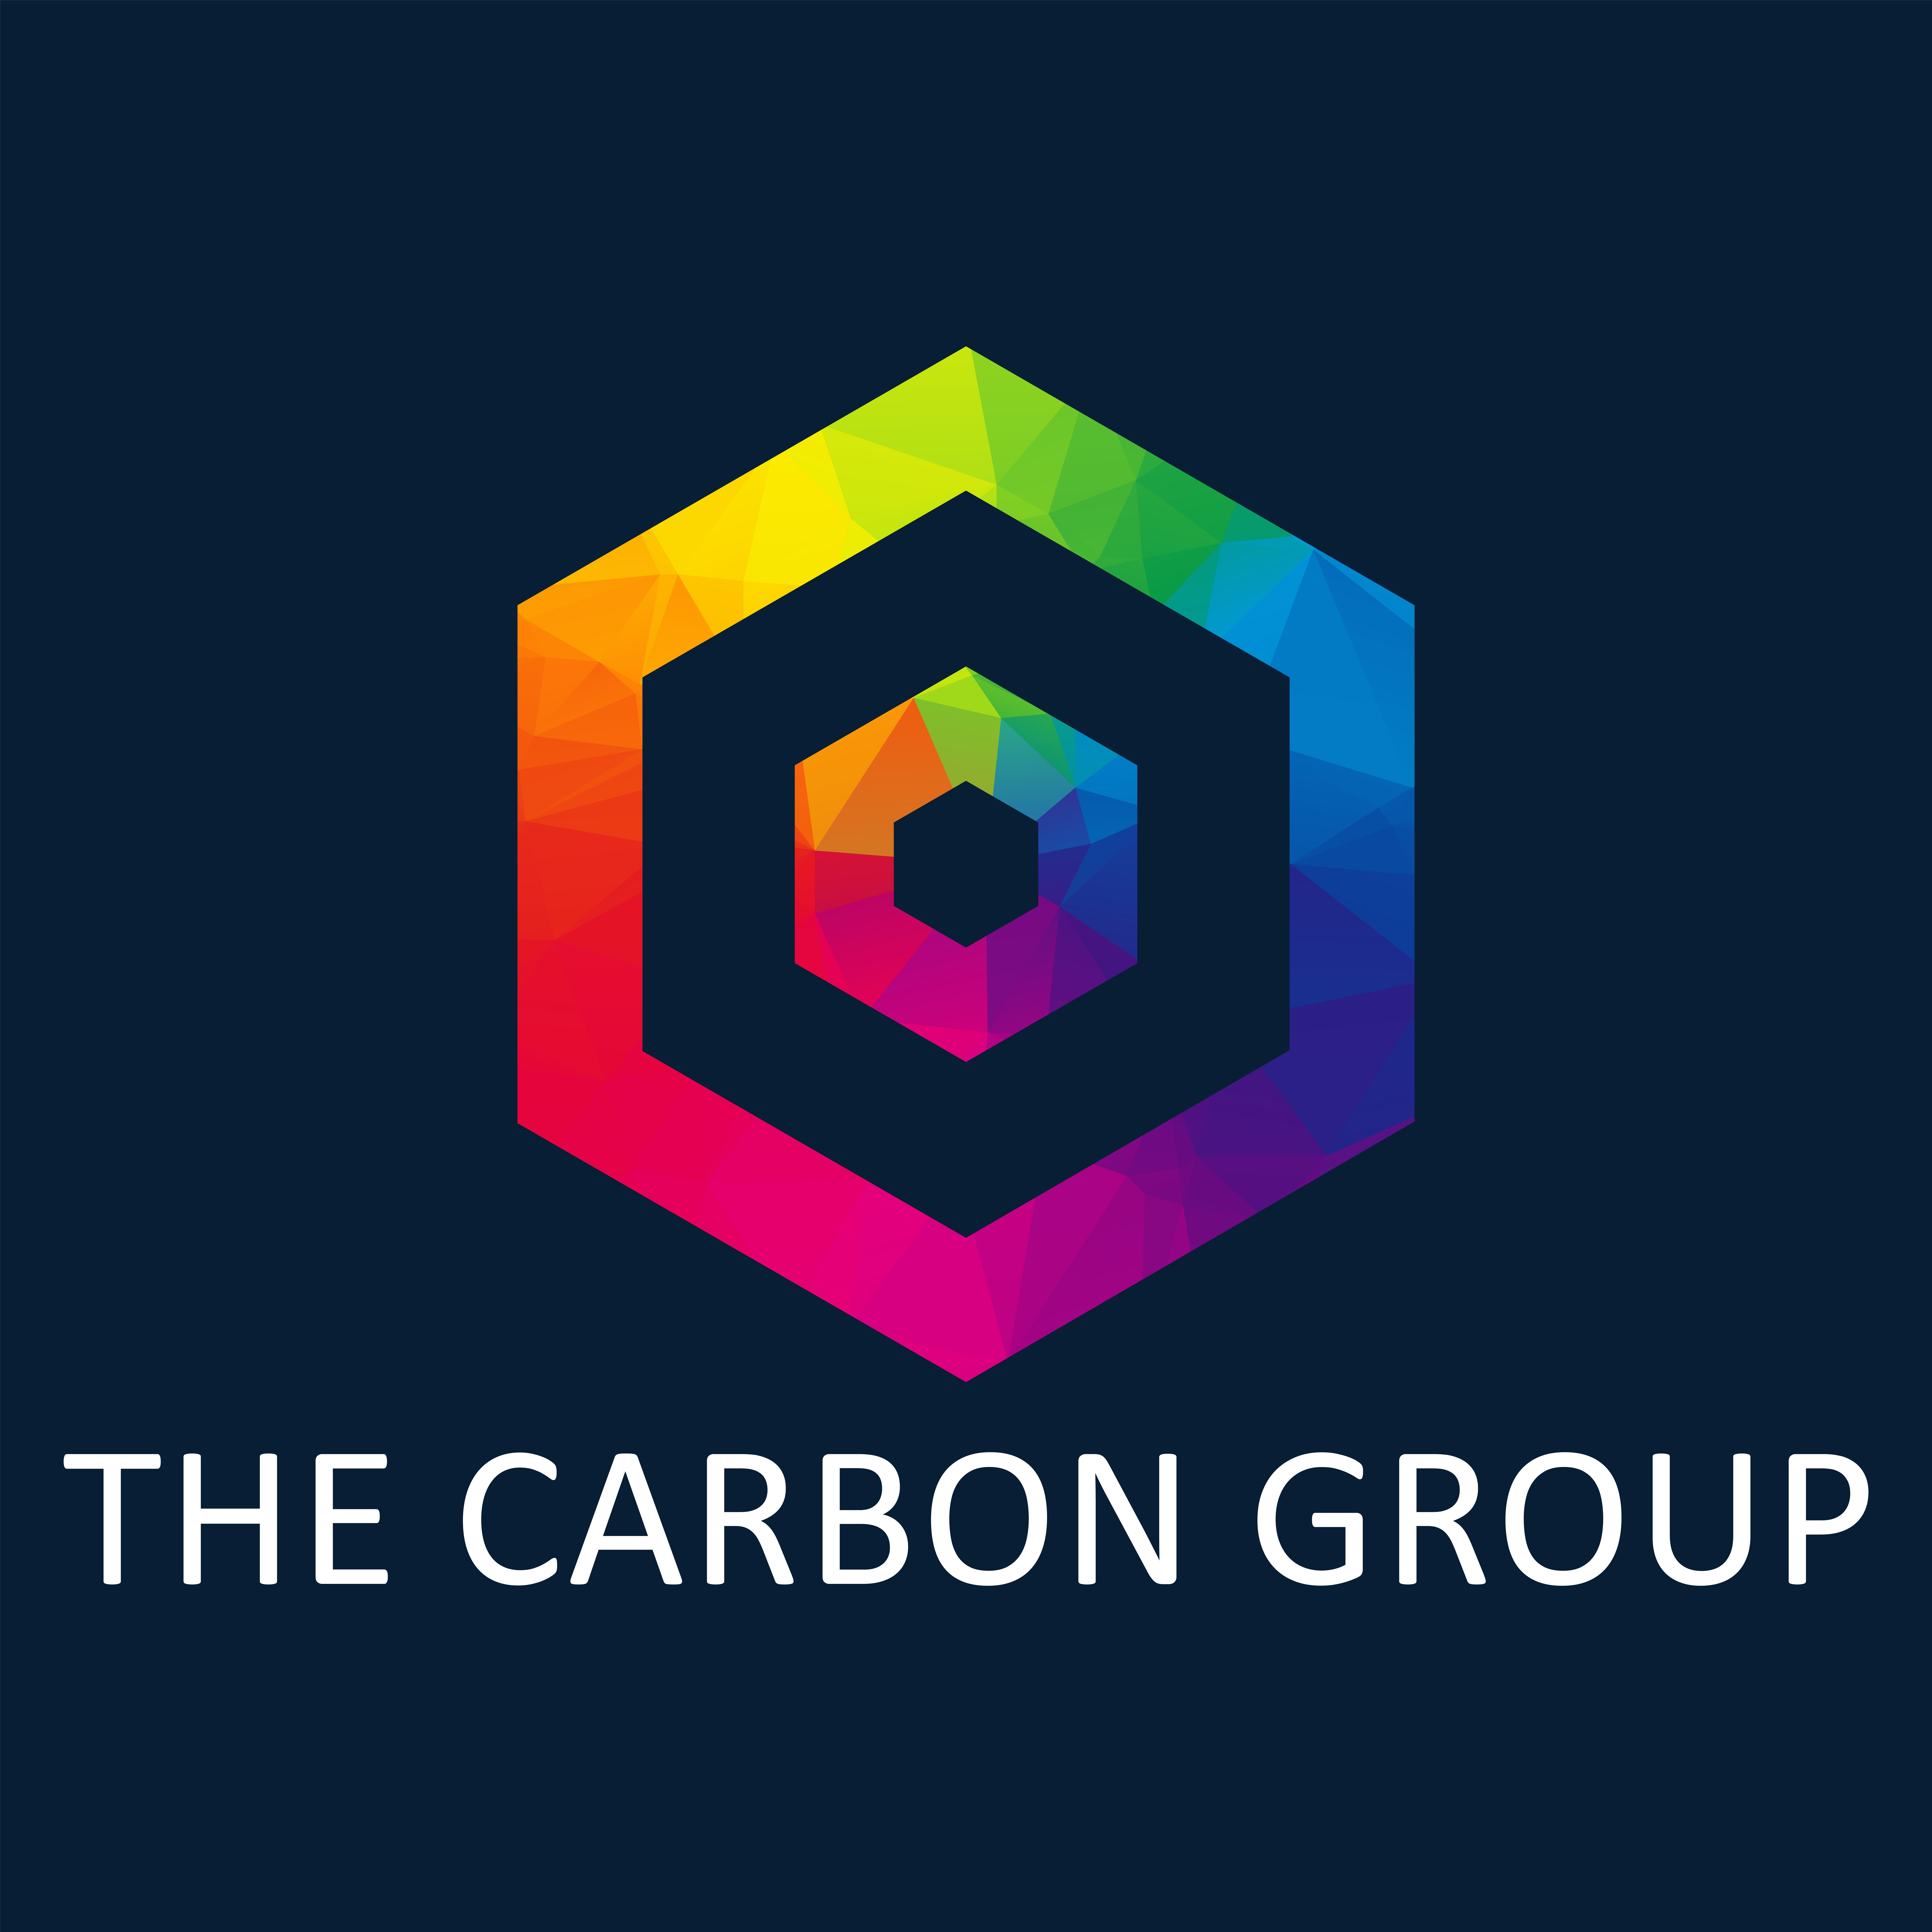 The Carbon Group company logo